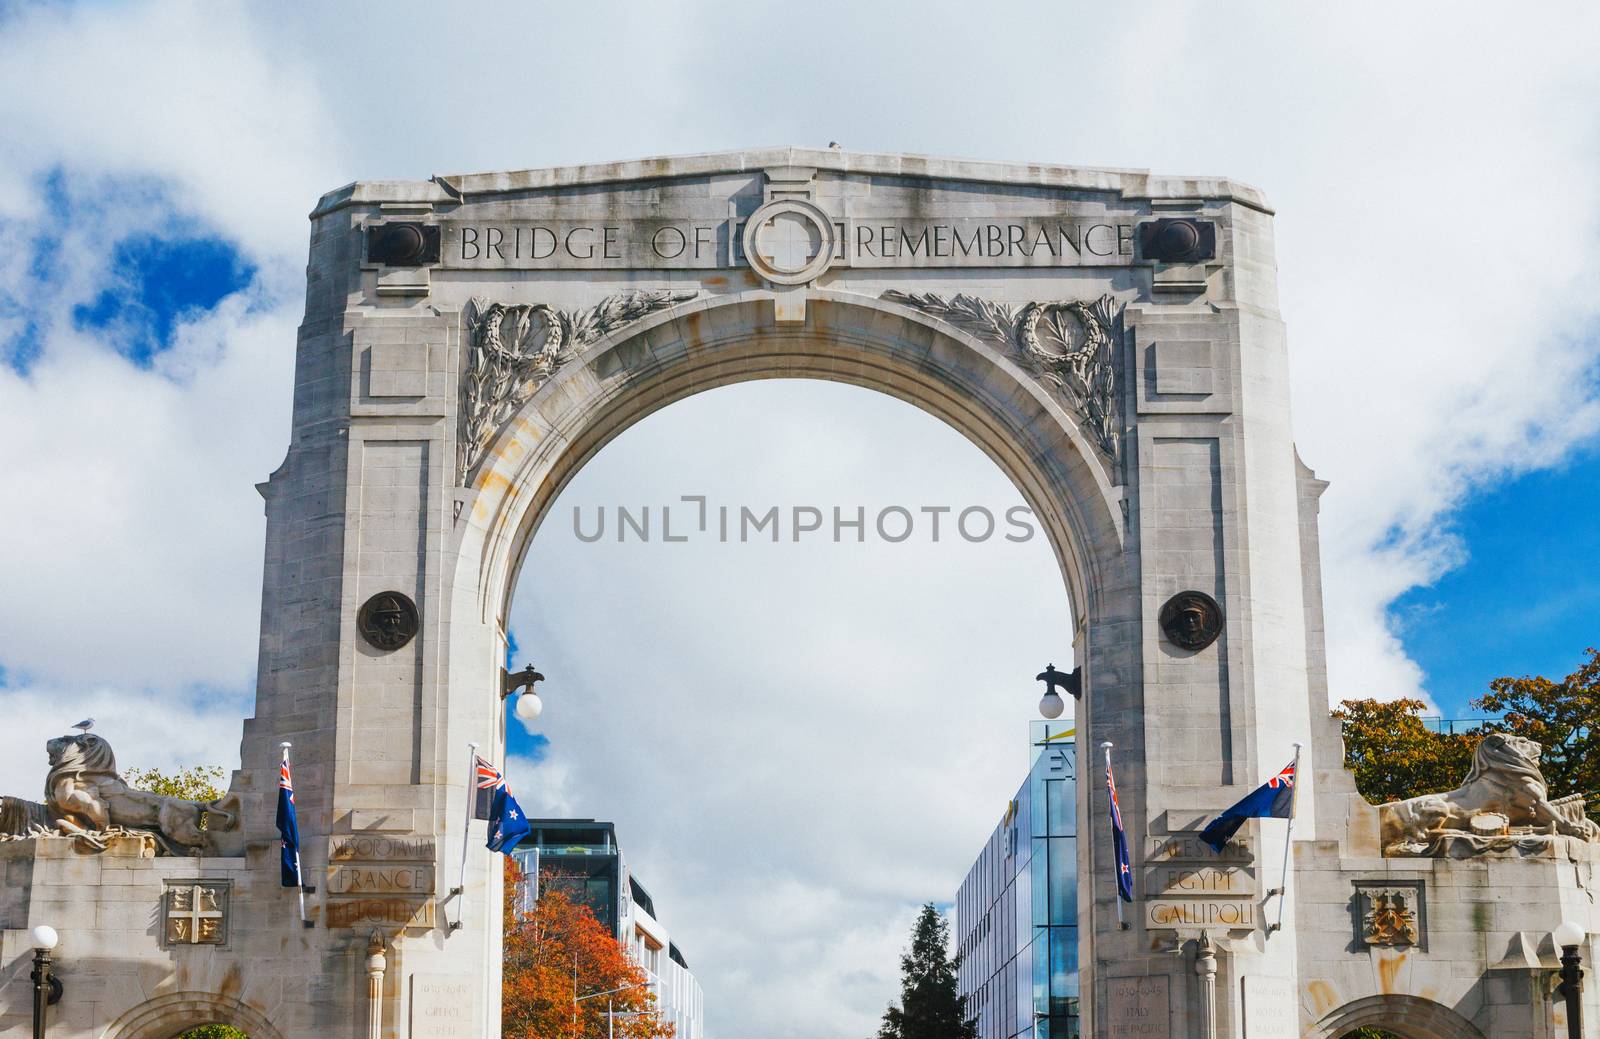 Bridge of Remembrance at day by cozyta